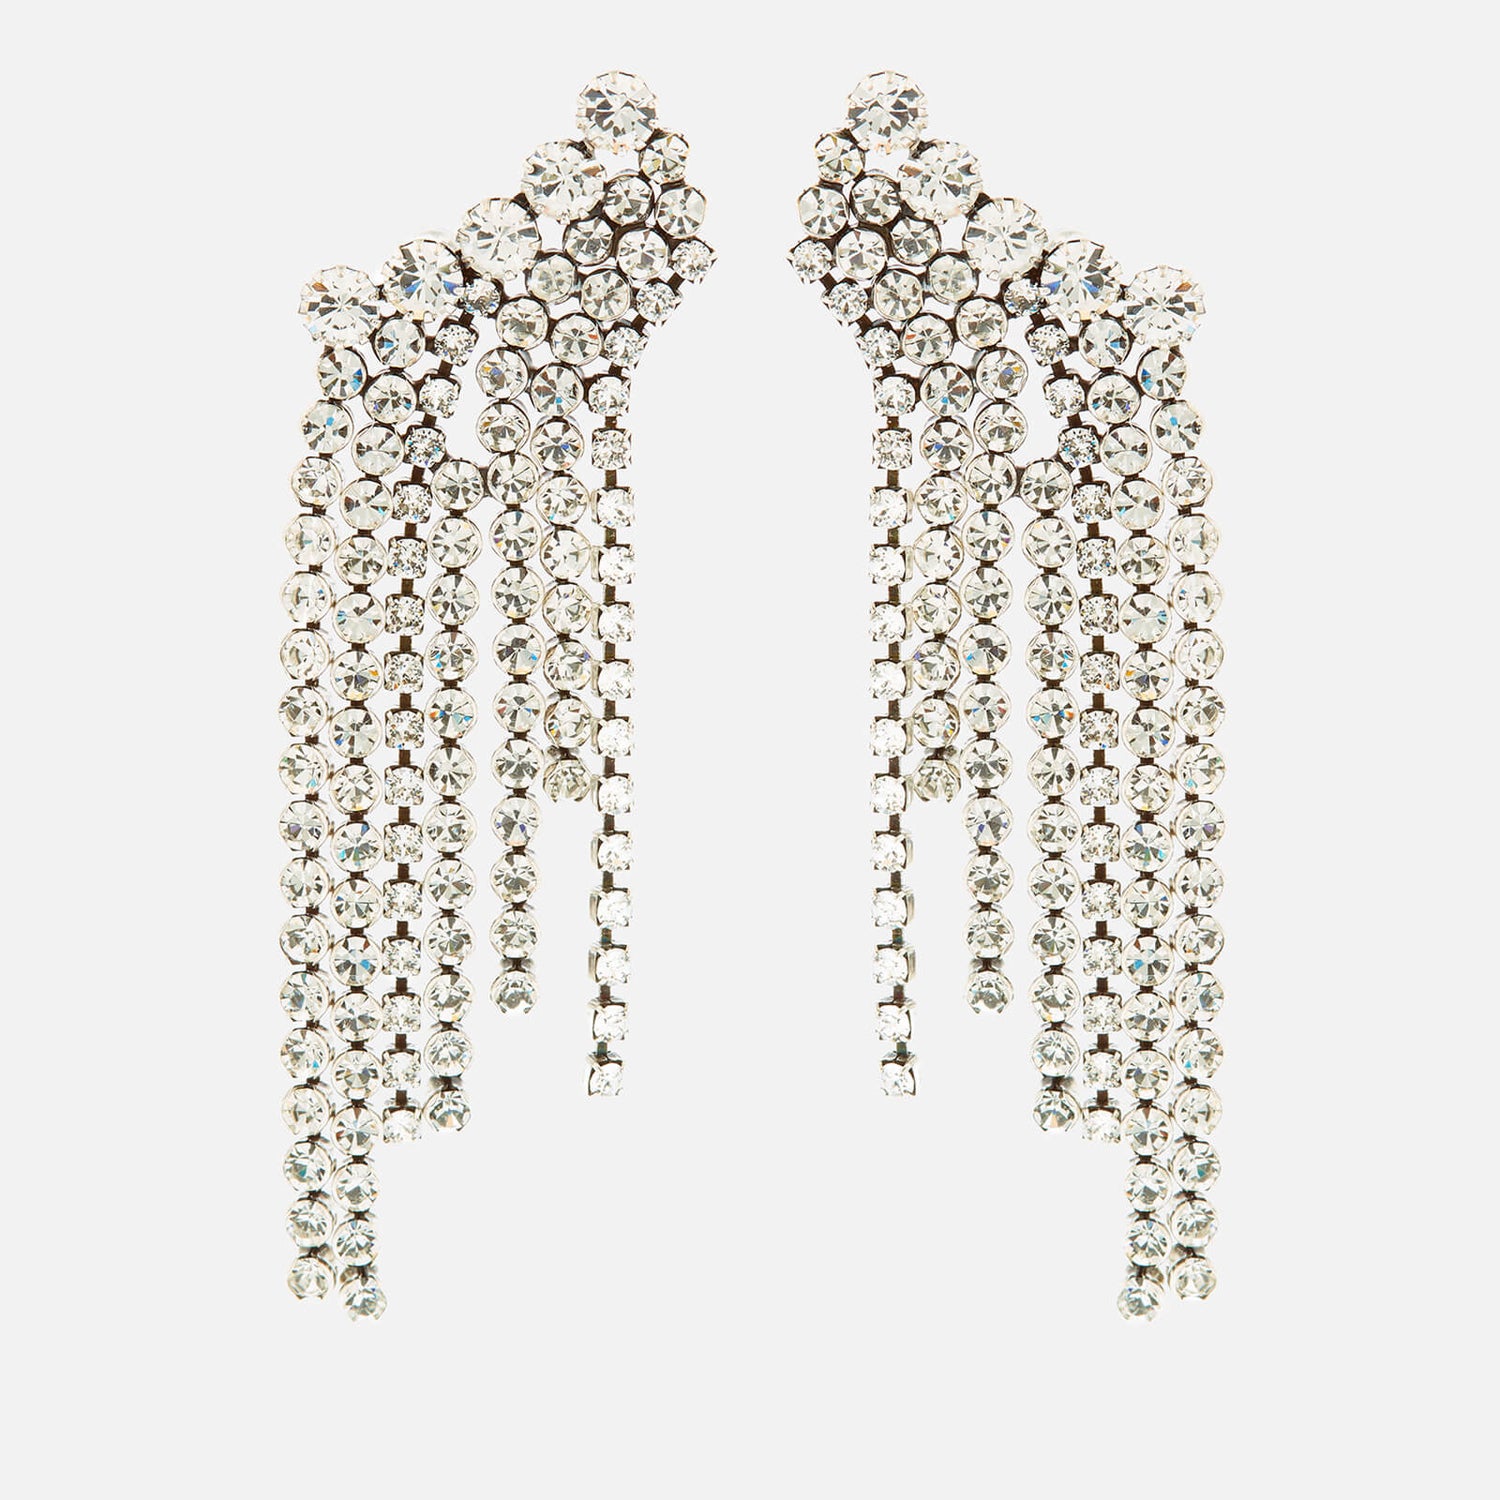 Isabel Marant A Wild Shore Silver-Tone and Crystal Drop Earrings